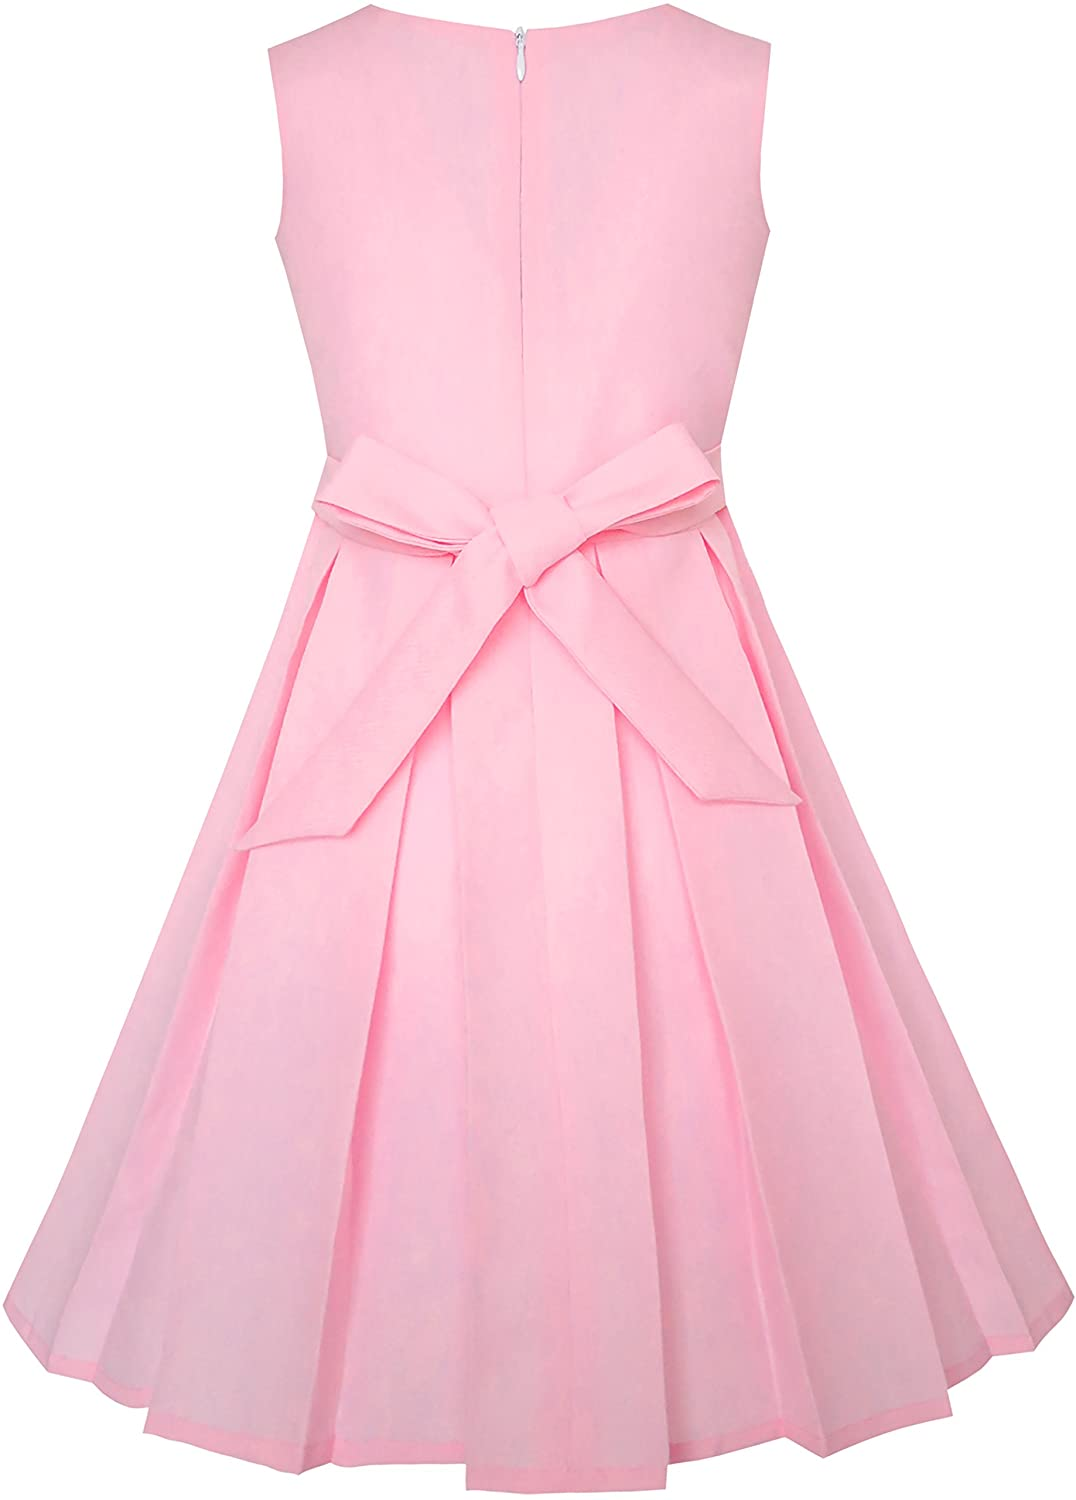 GIRLS COLOR BLOCK CONTRAST BOW TIE PARTY DRESS